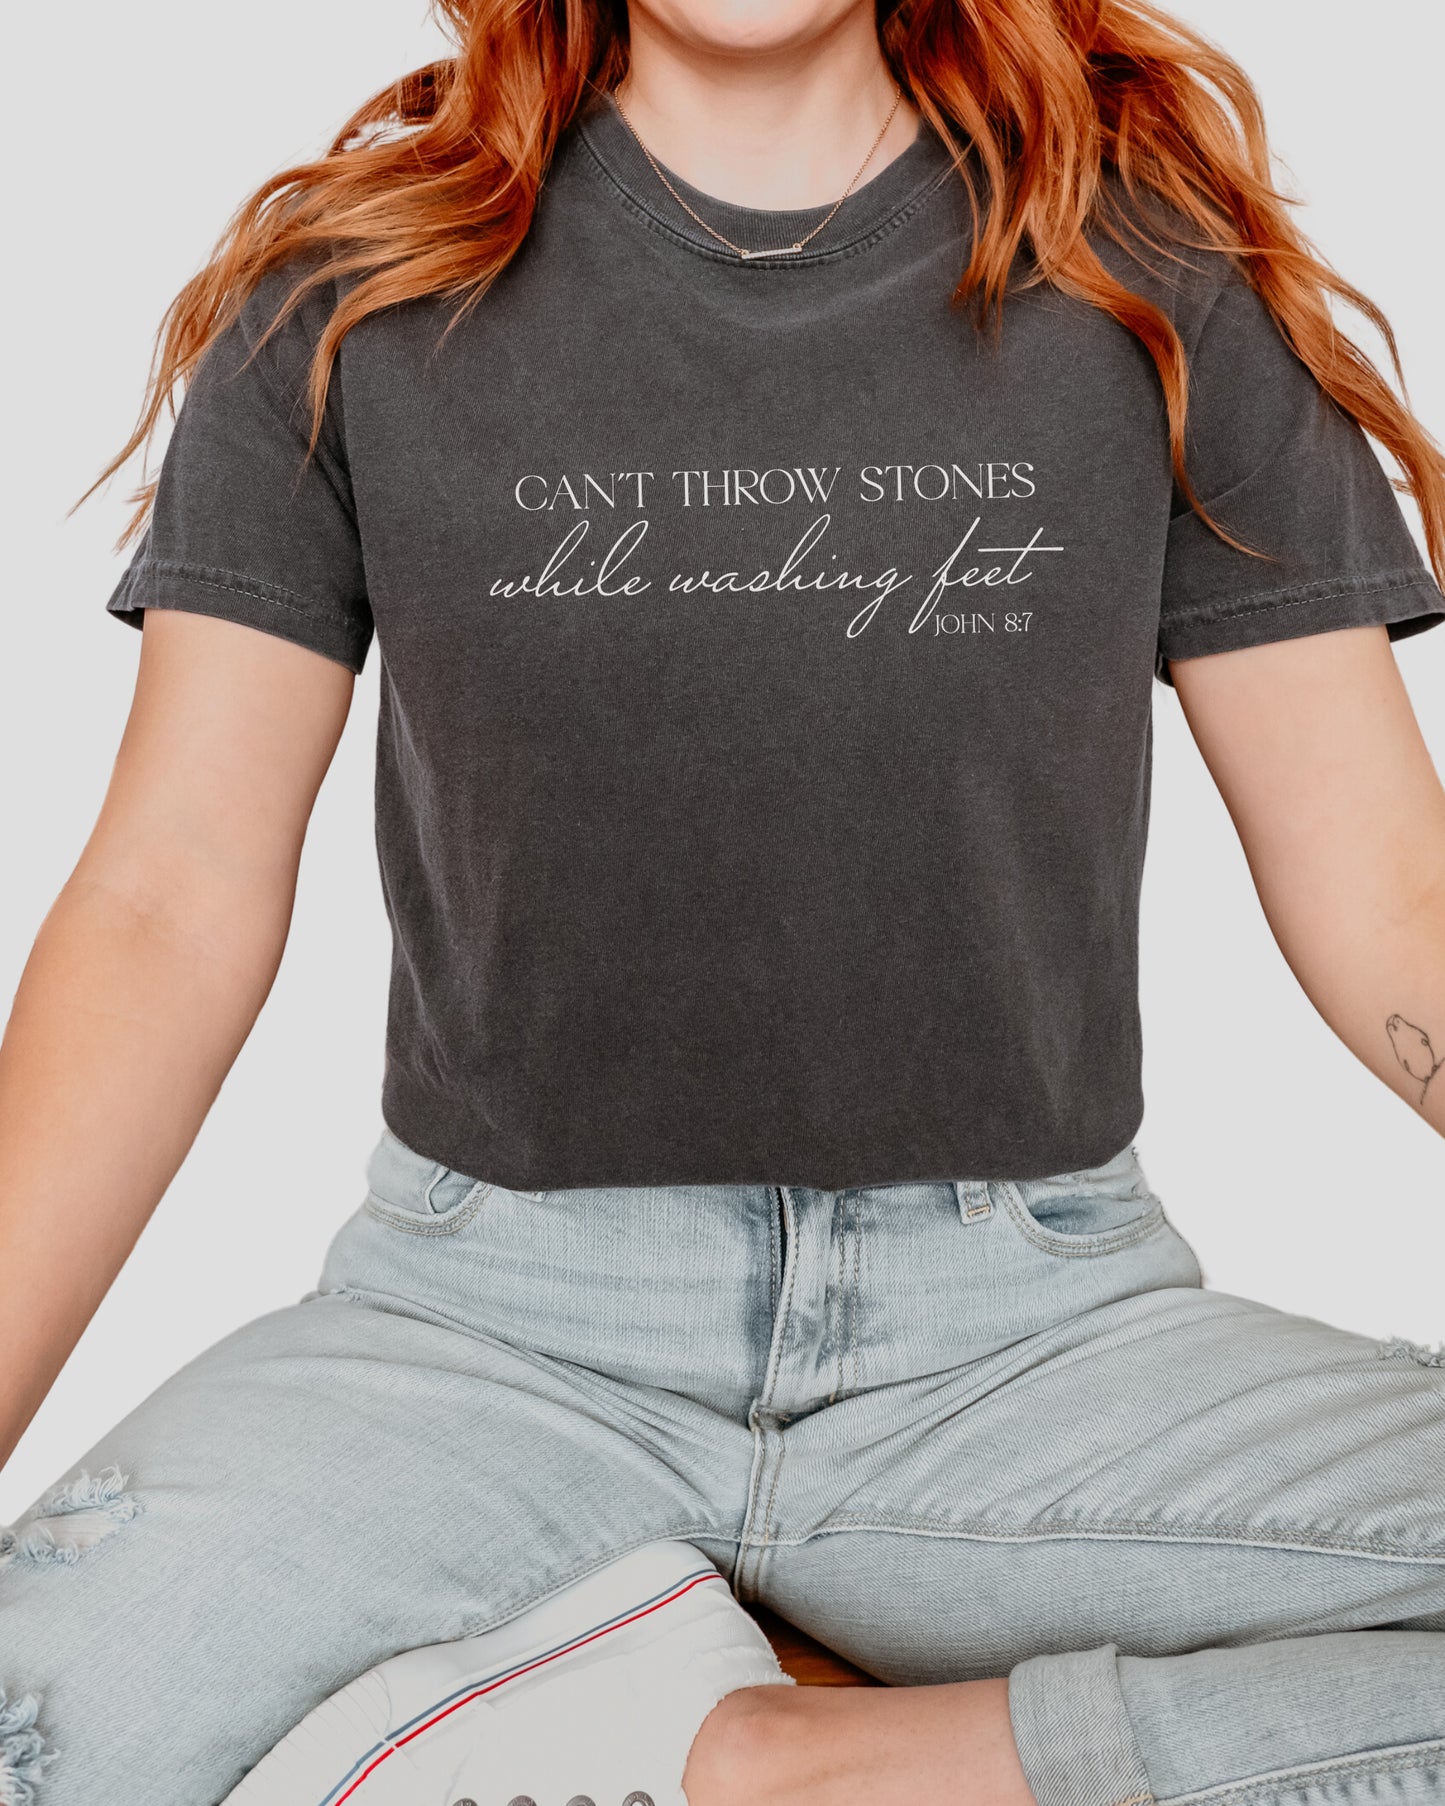 Can't Throw Stones While Washing Feet Tee